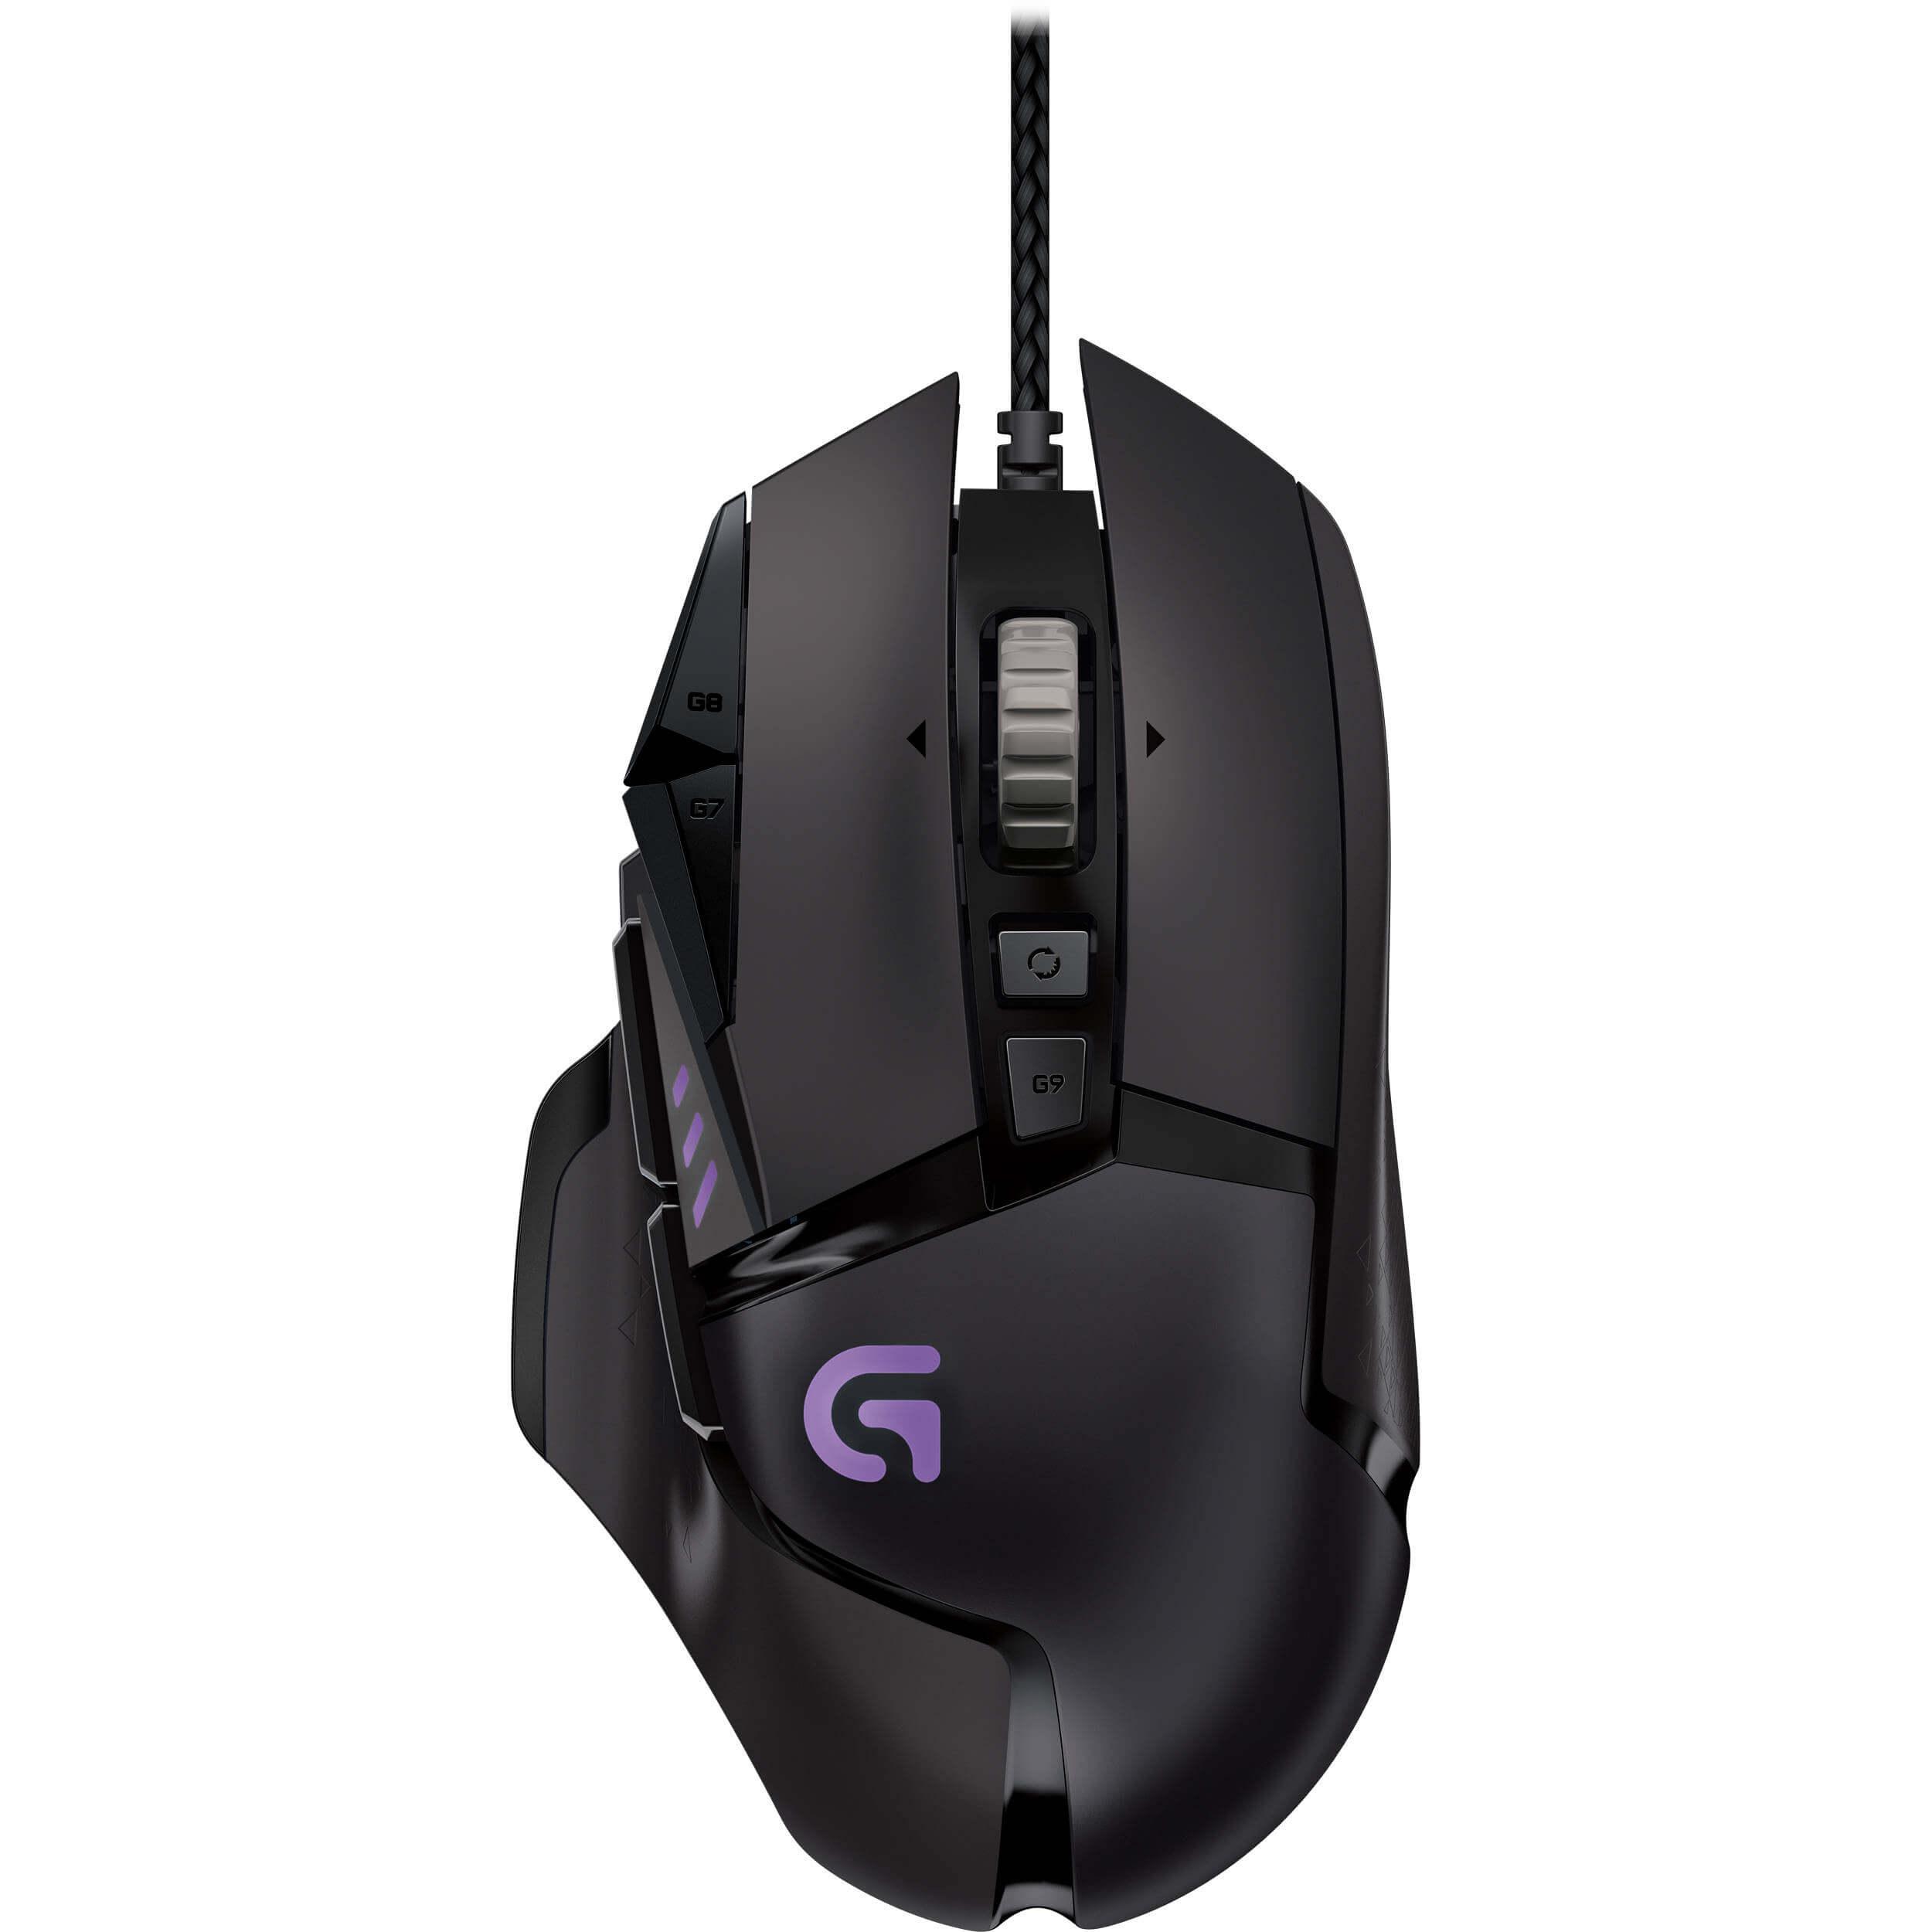 Logitech G502 HERO High Performance Wired Gaming Mouse, HERO 25K Sensor, RGB, Adjustable Weights, 11 Programmable Buttons